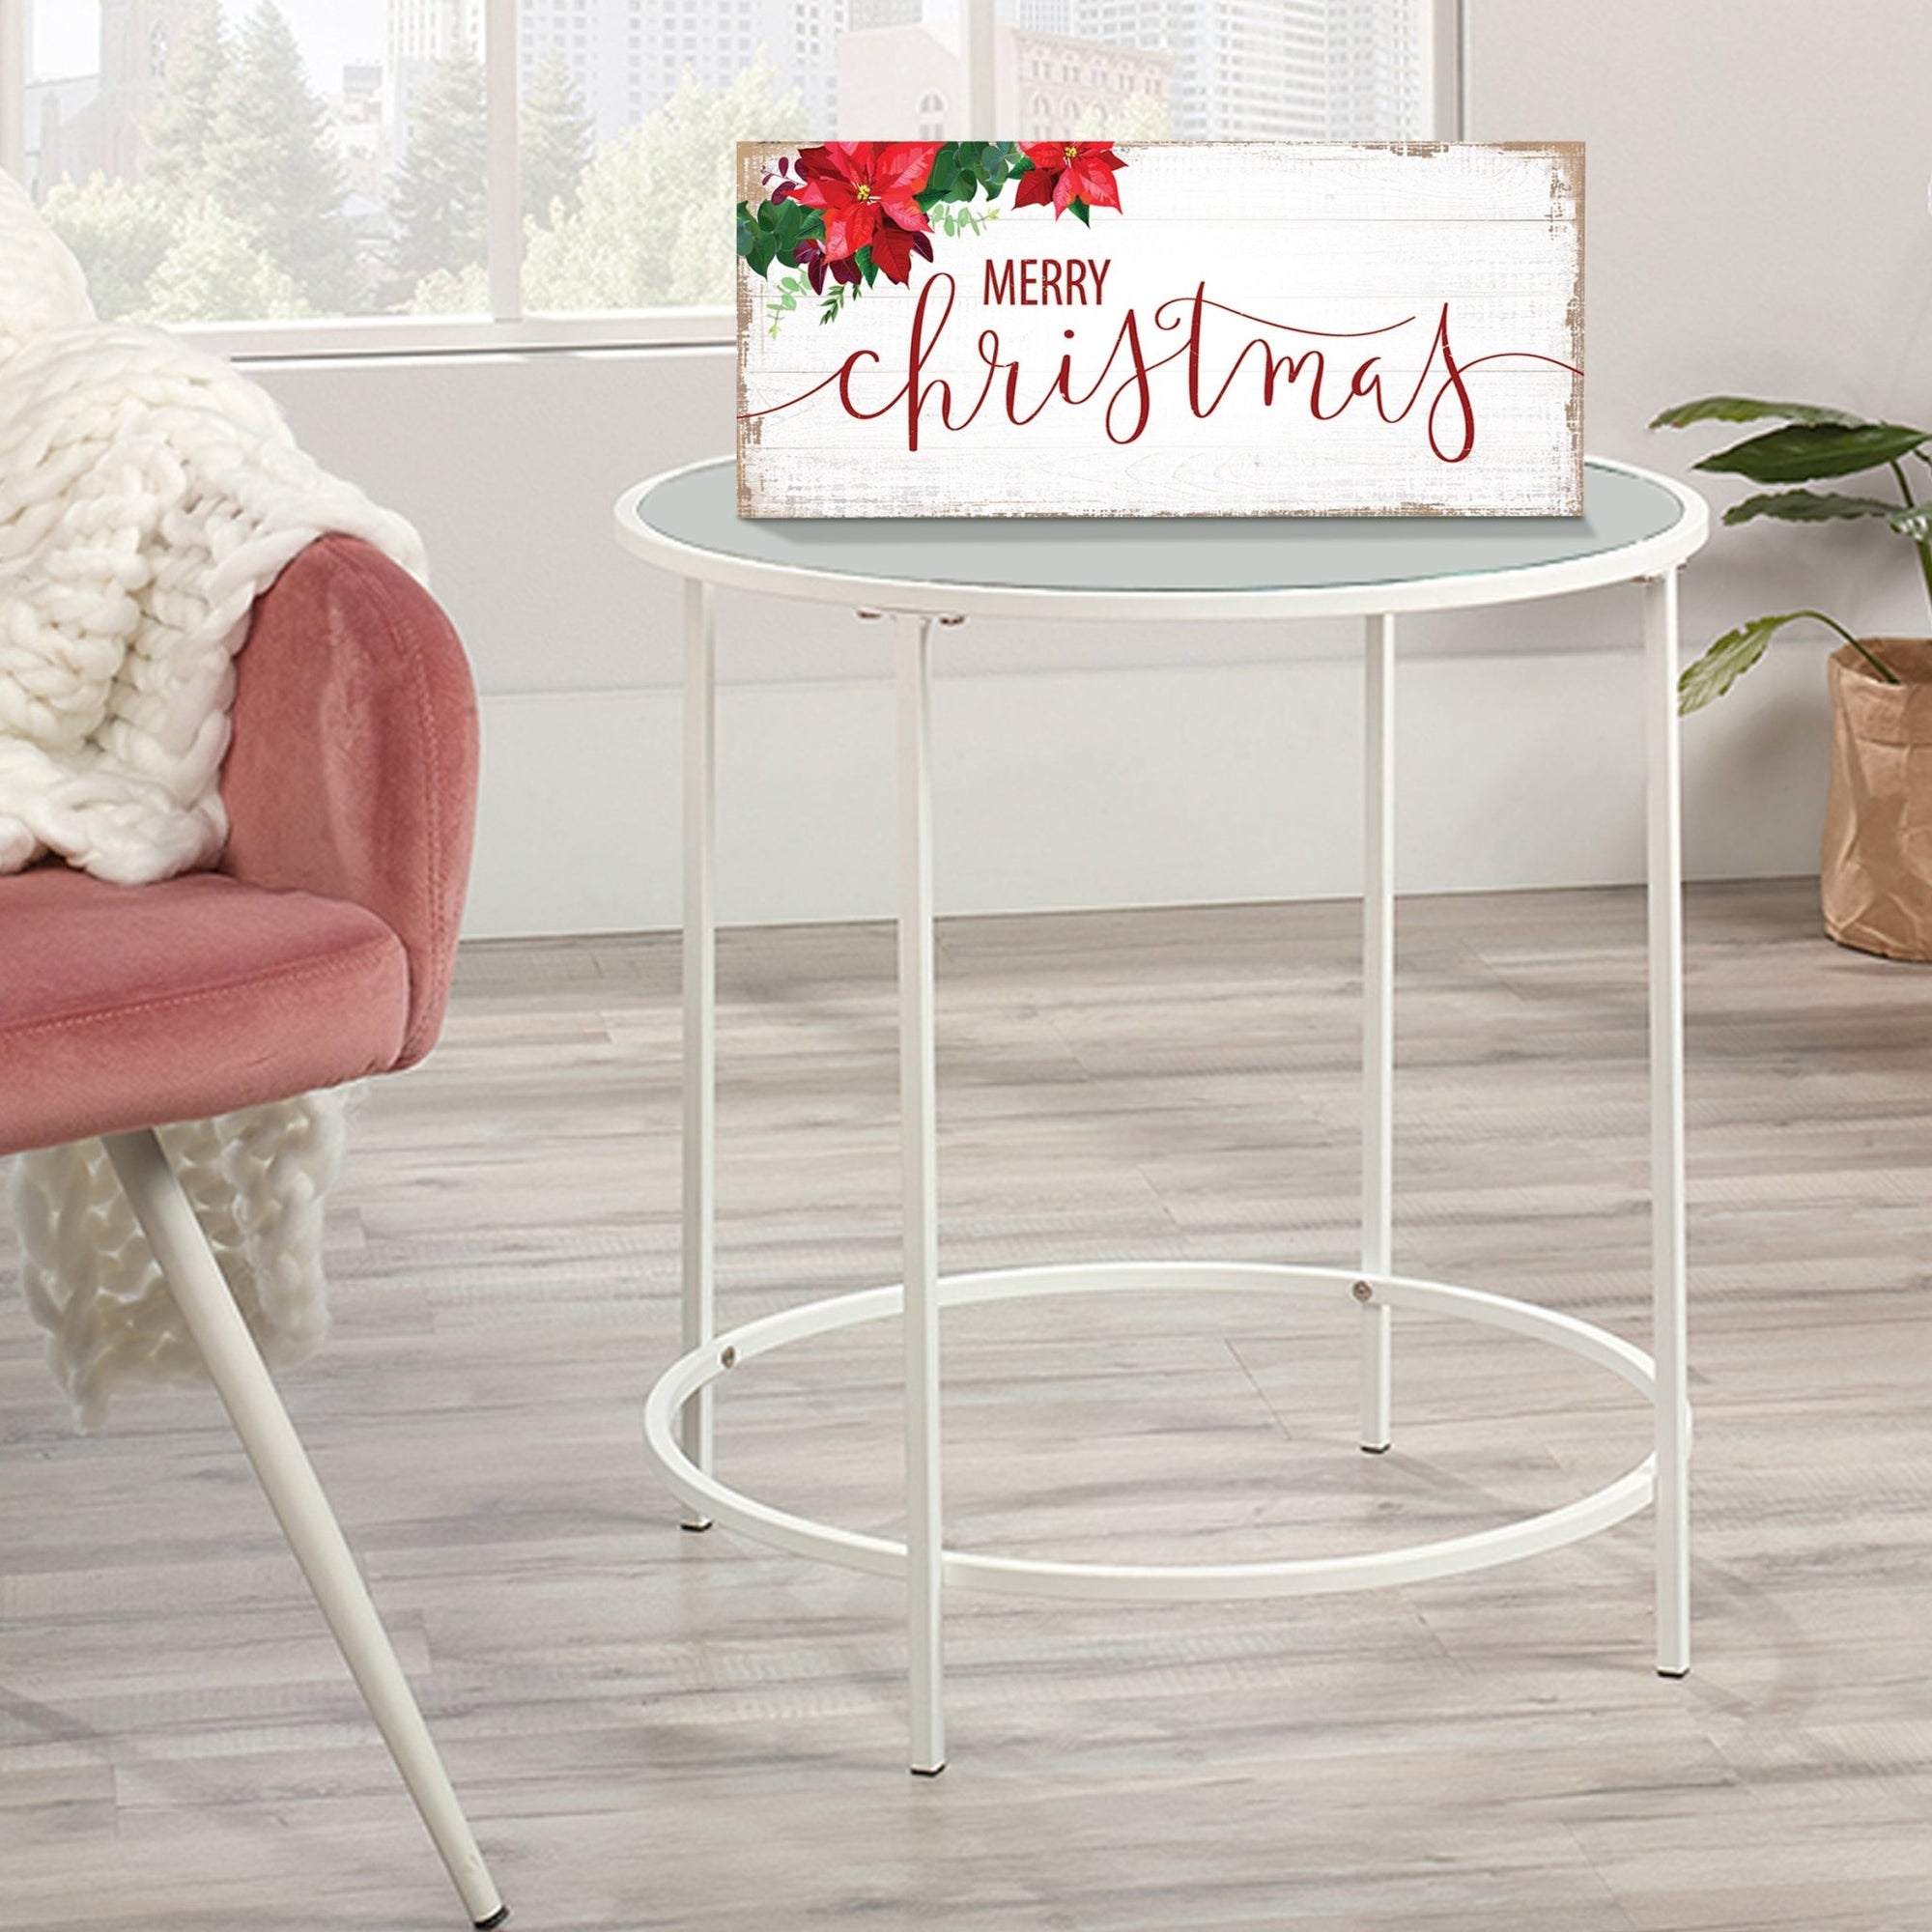 Merry Christmas | Wooden Tabletop Decoration 10x4 - LifeSong Milestones